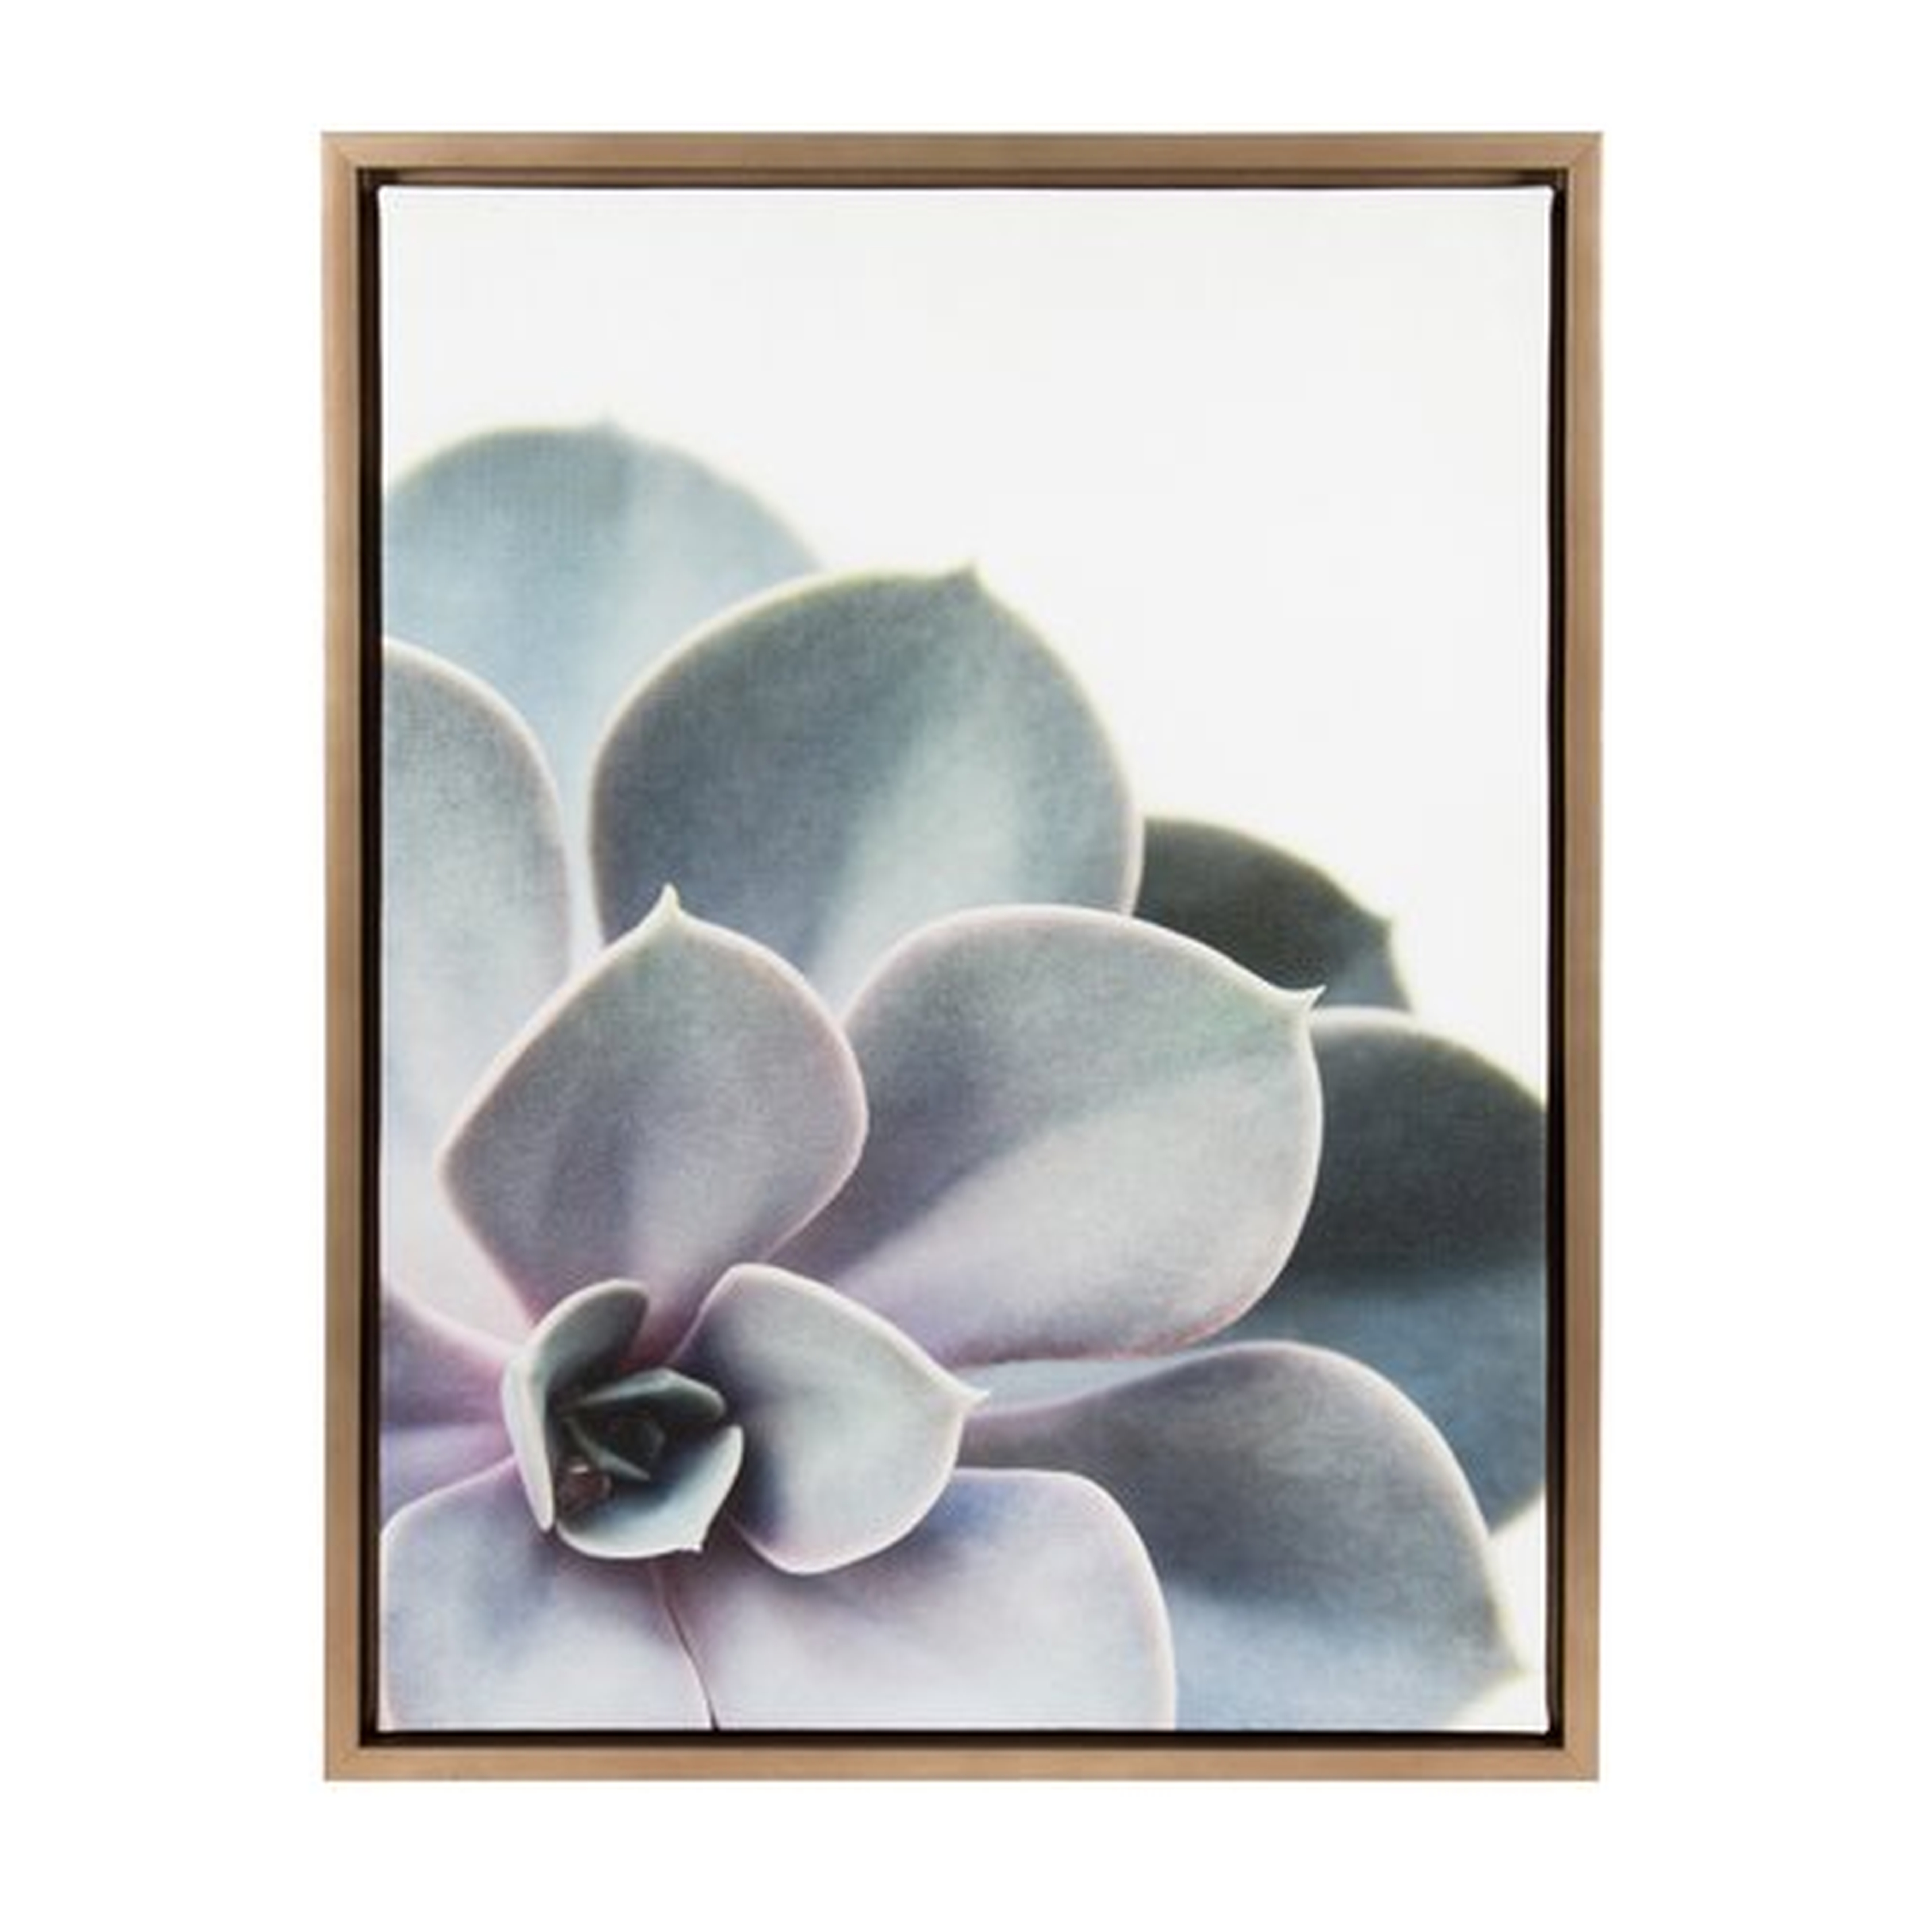 Sylvie Gold Succelent 5 by Emiko and Mark Franzen - Picture Frame Photograph Print on Canvas - AllModern